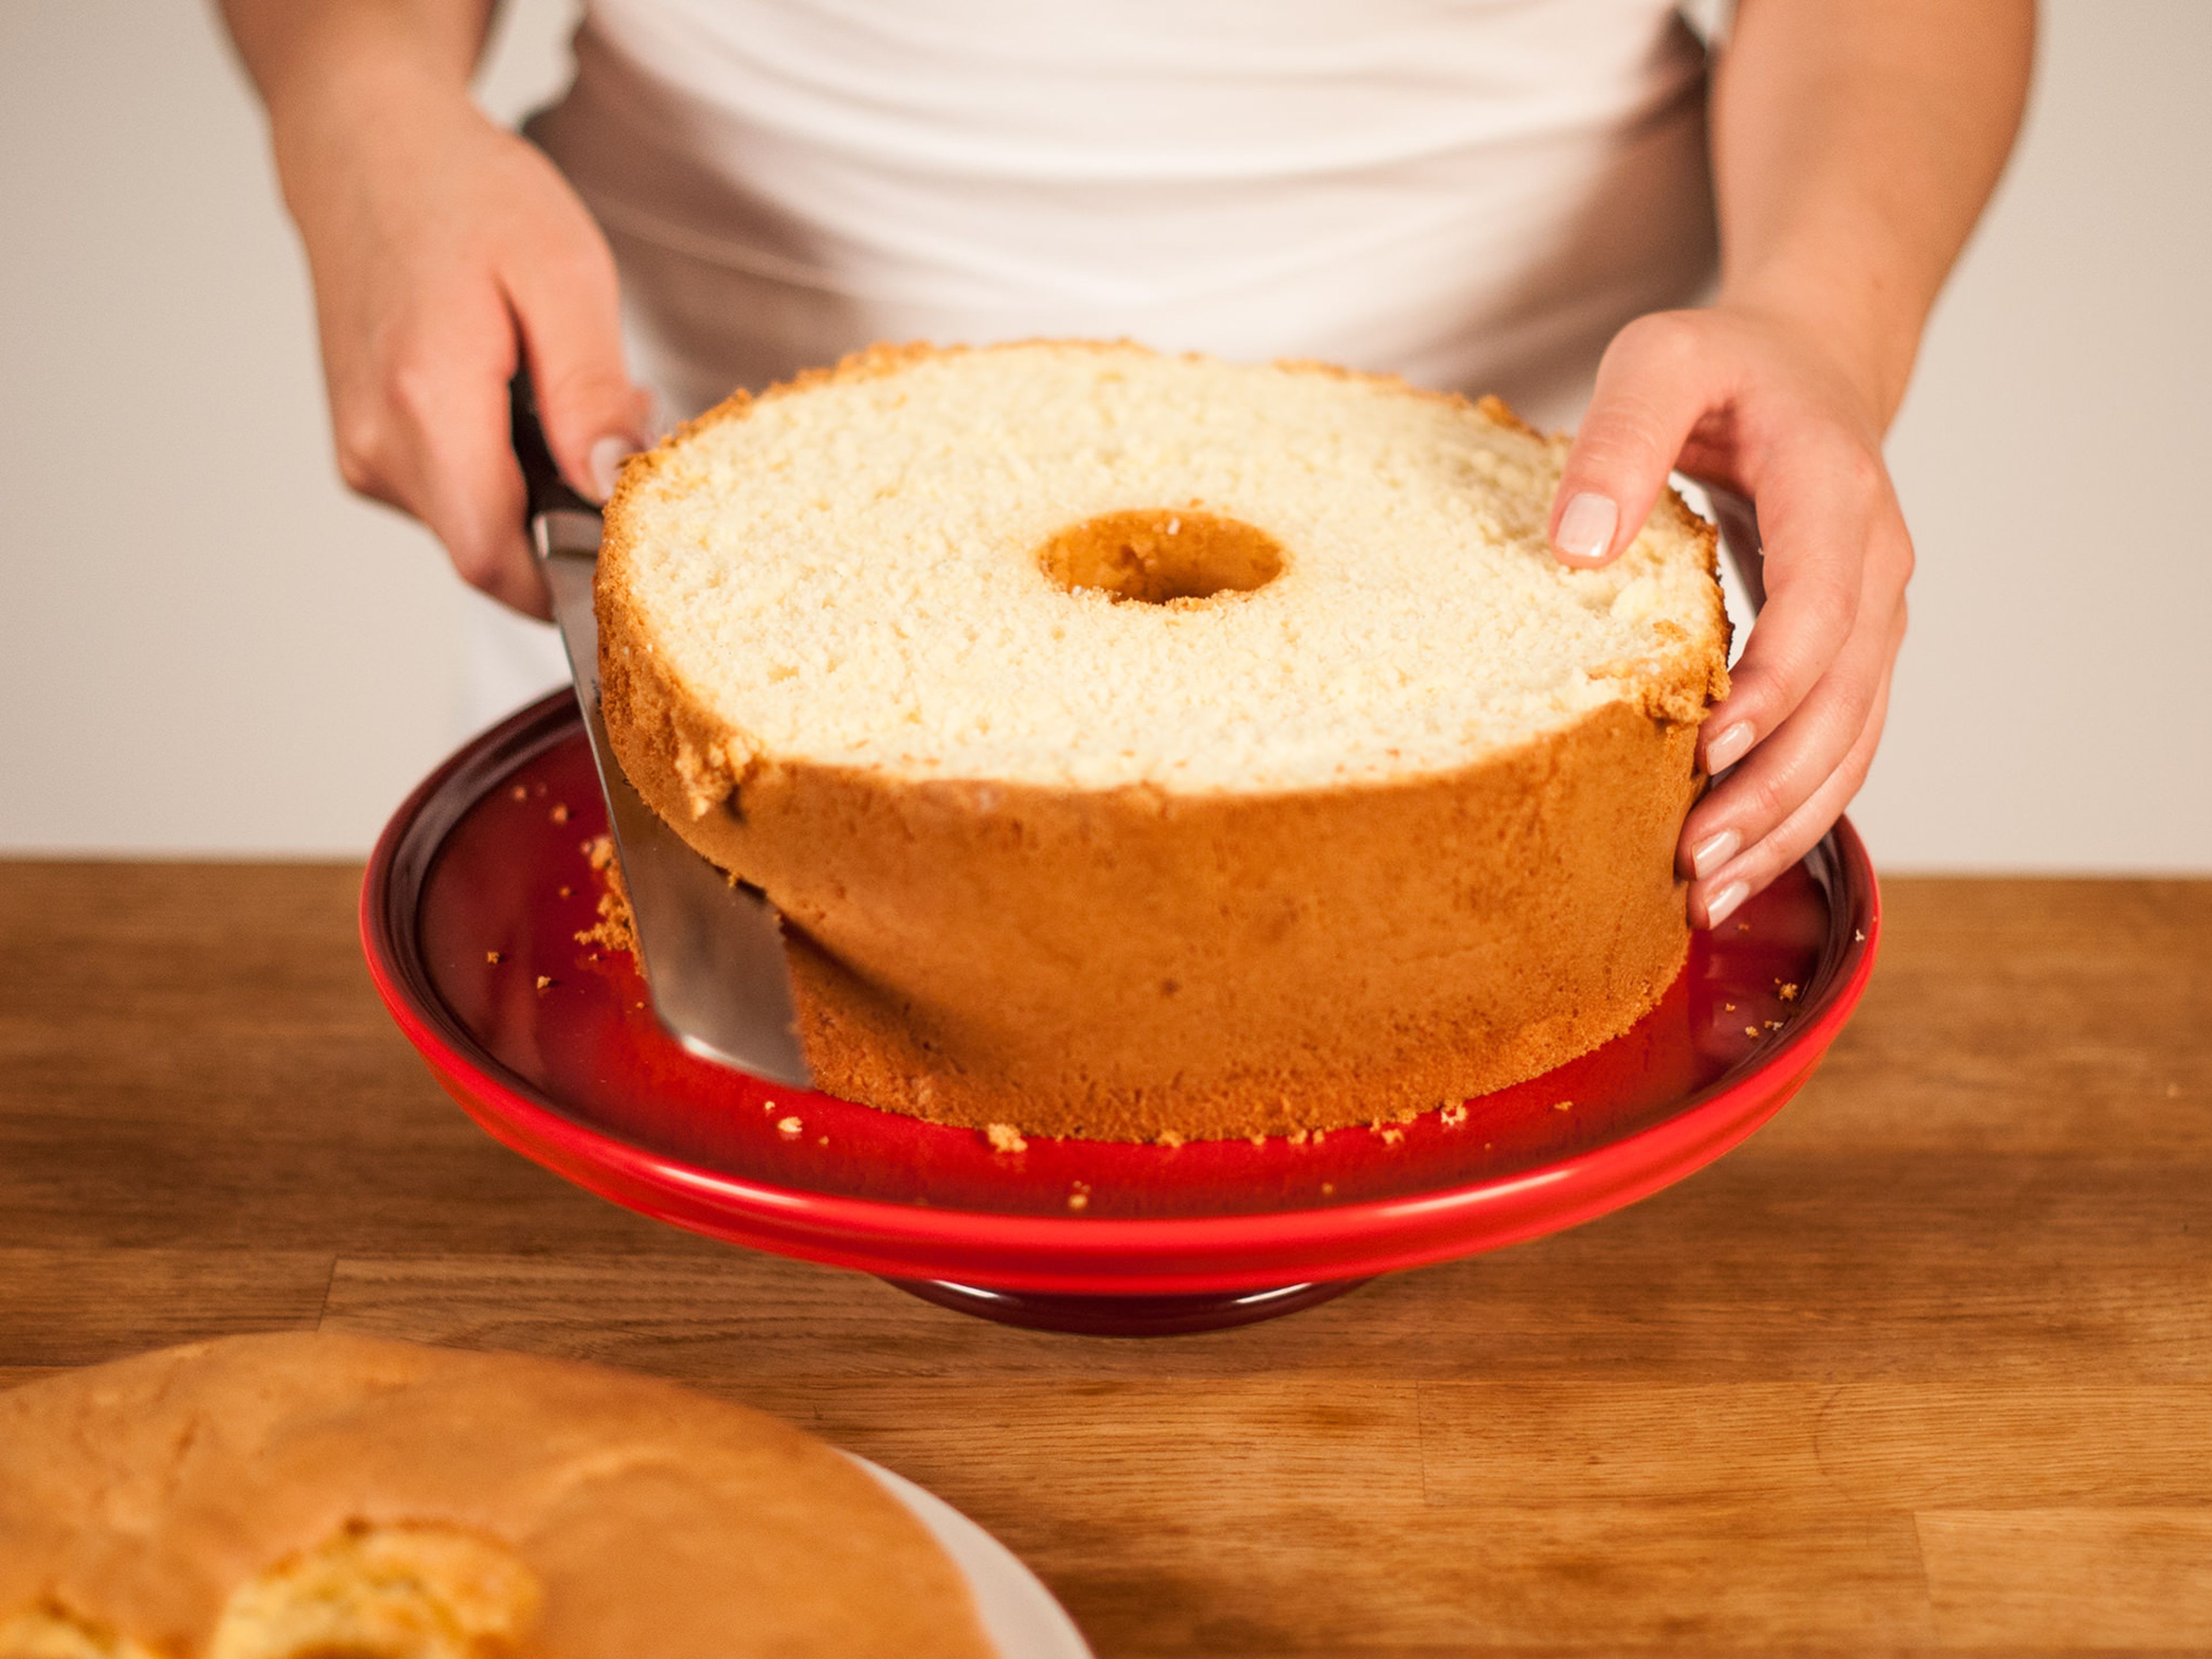 Slide a paring knife around edges of tube and side of pan. Carefully release the cake. Cut cake horizontally into 3 layers with a serrated knife.